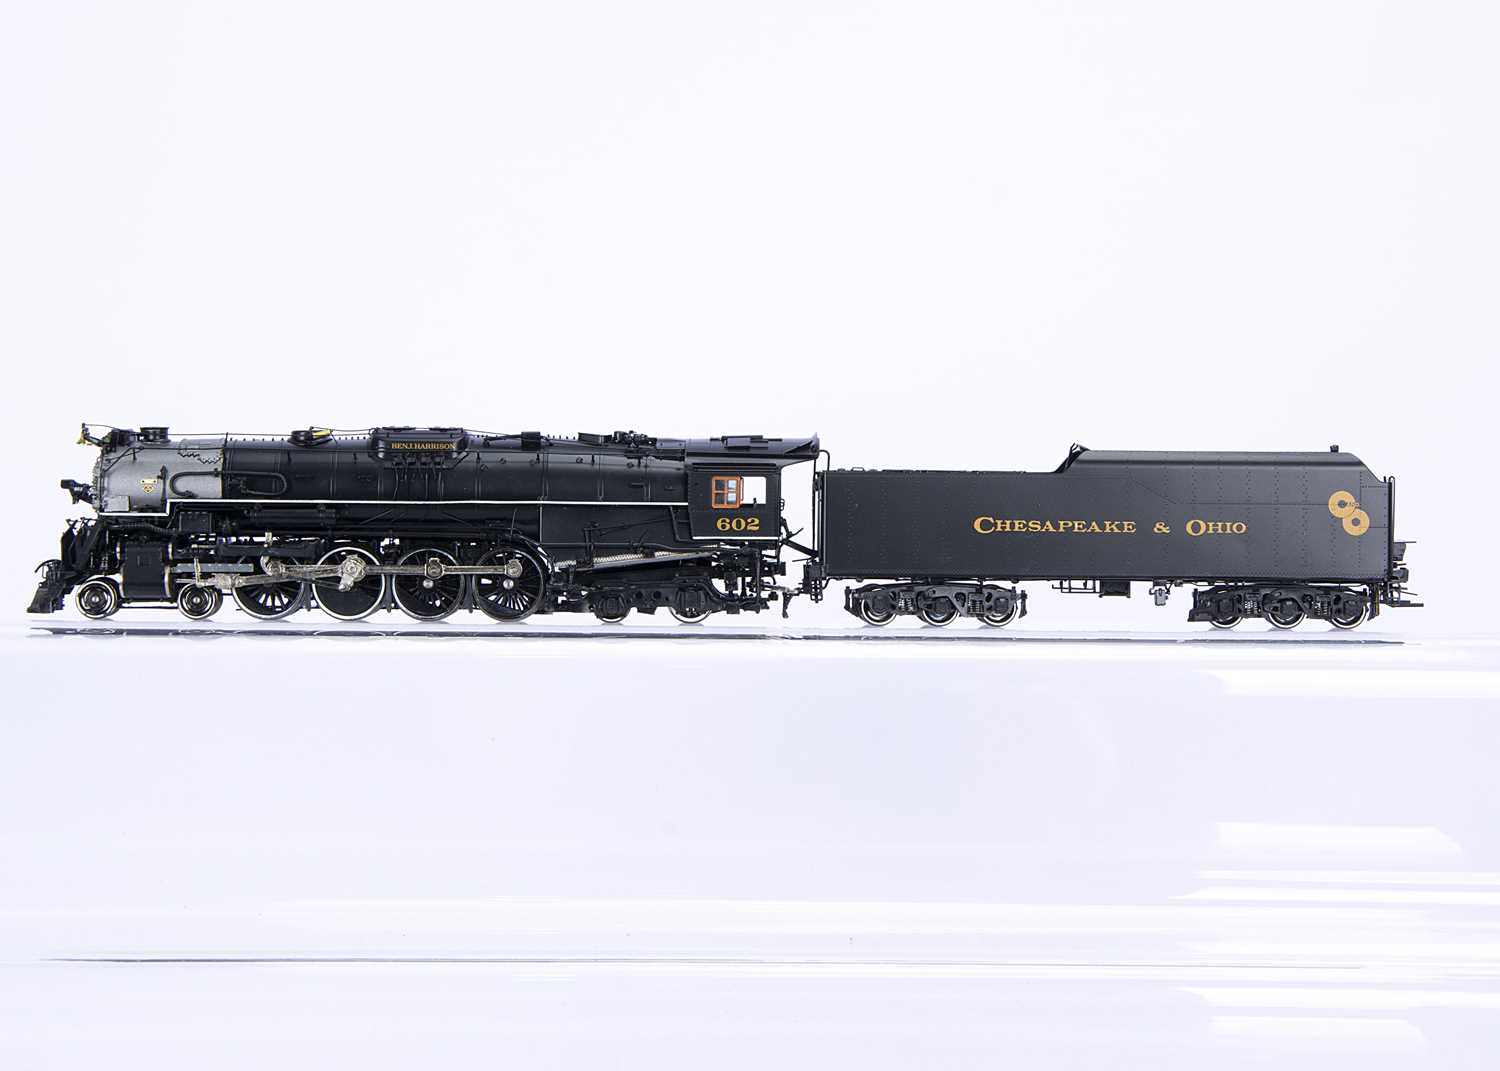 Lot 878 - Iron Horse Models by Precision Scale Co H0 Gauge Chesapeake & Ohio Railway Class J-3 4-8-4 Factory Painted Road #602 W/22-RC Tender PSC #16976-1